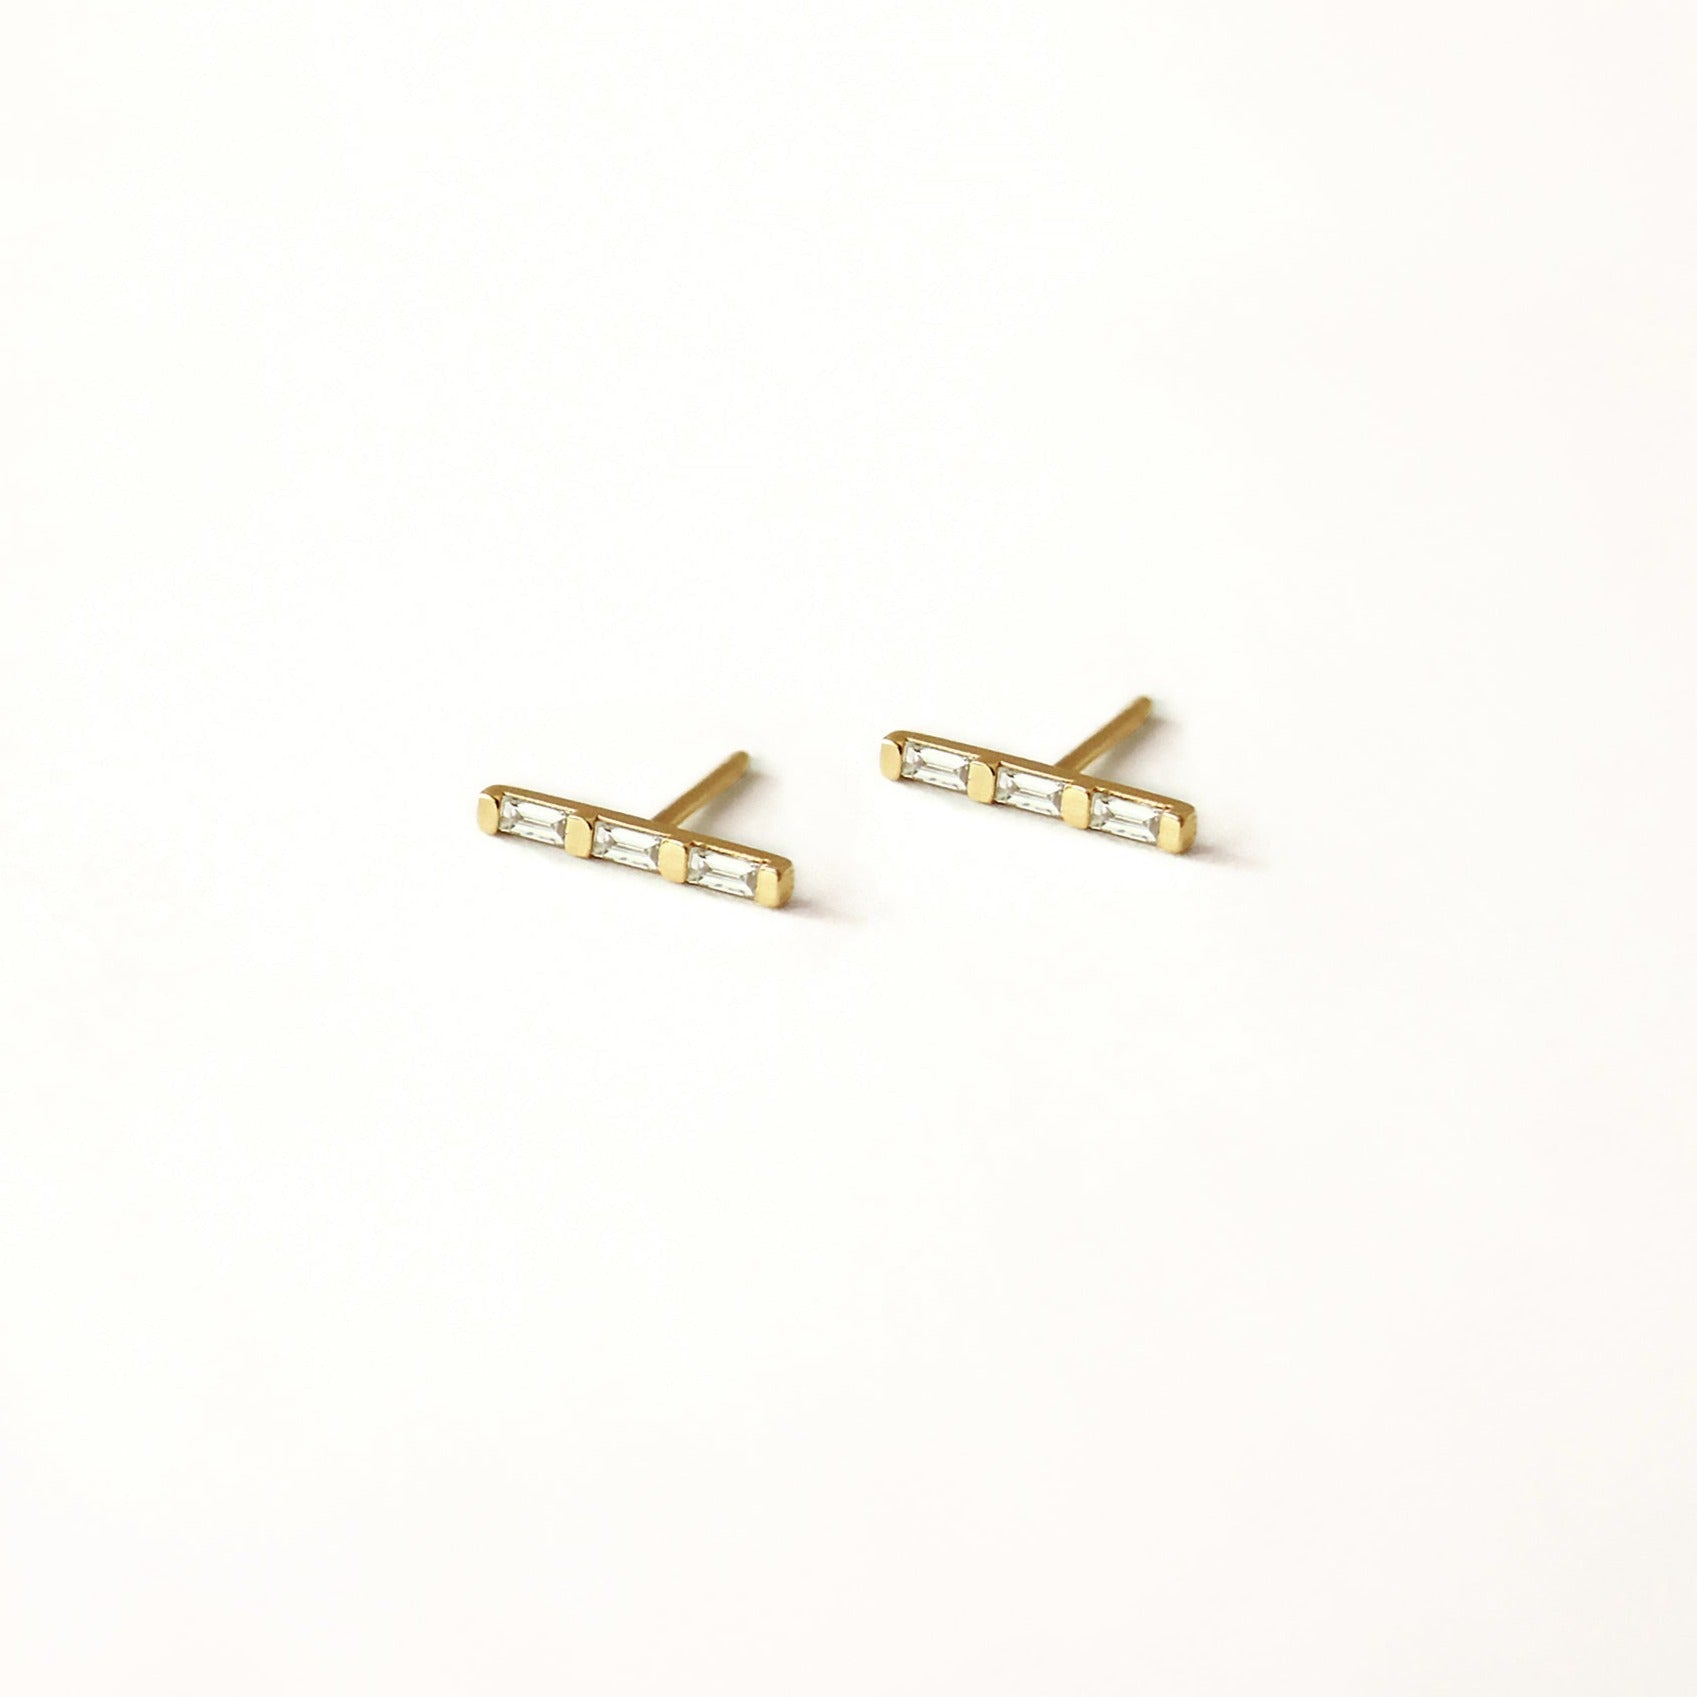 3 rectangle diamonds on each stud earring. Recycled 14k gold and sustainably sourced diamonds. 